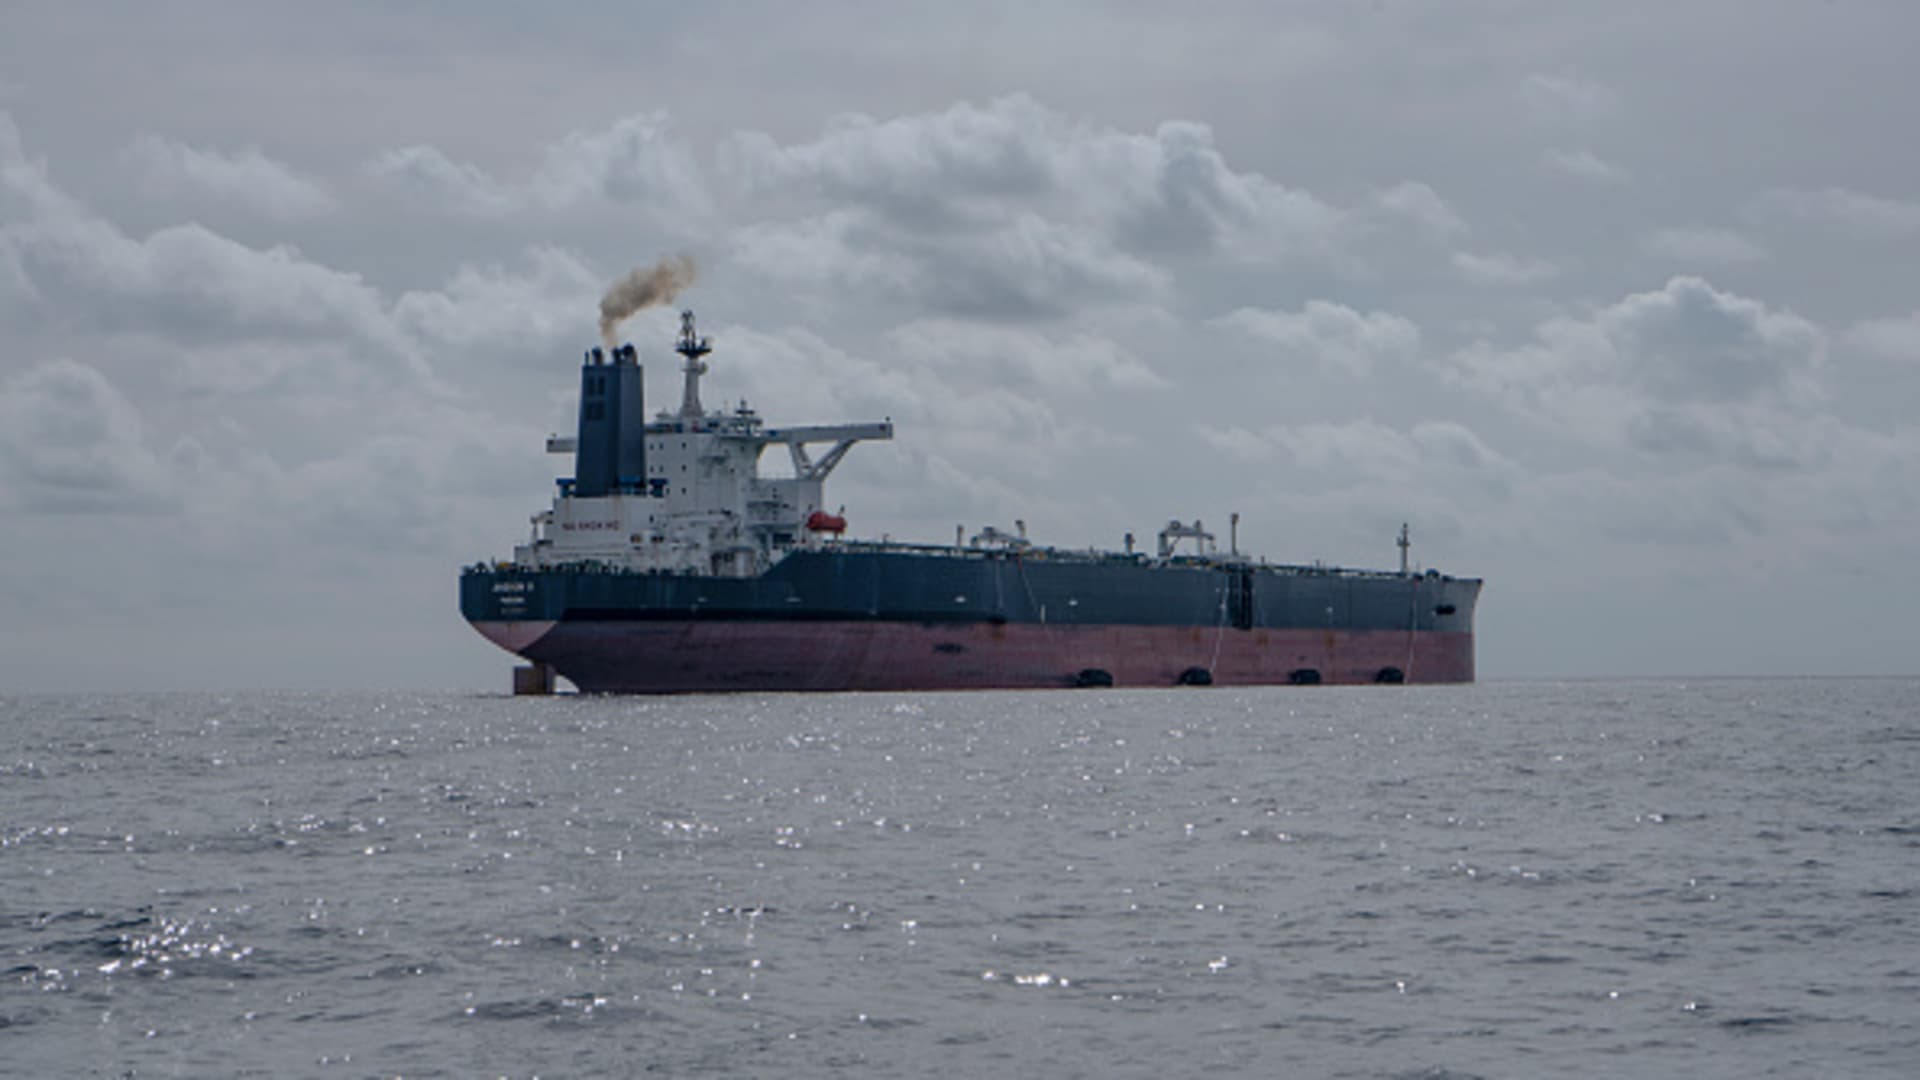 ‘Dark’ ships are faking their locations to move oil around the world — and it’s likely worth billions of dollars